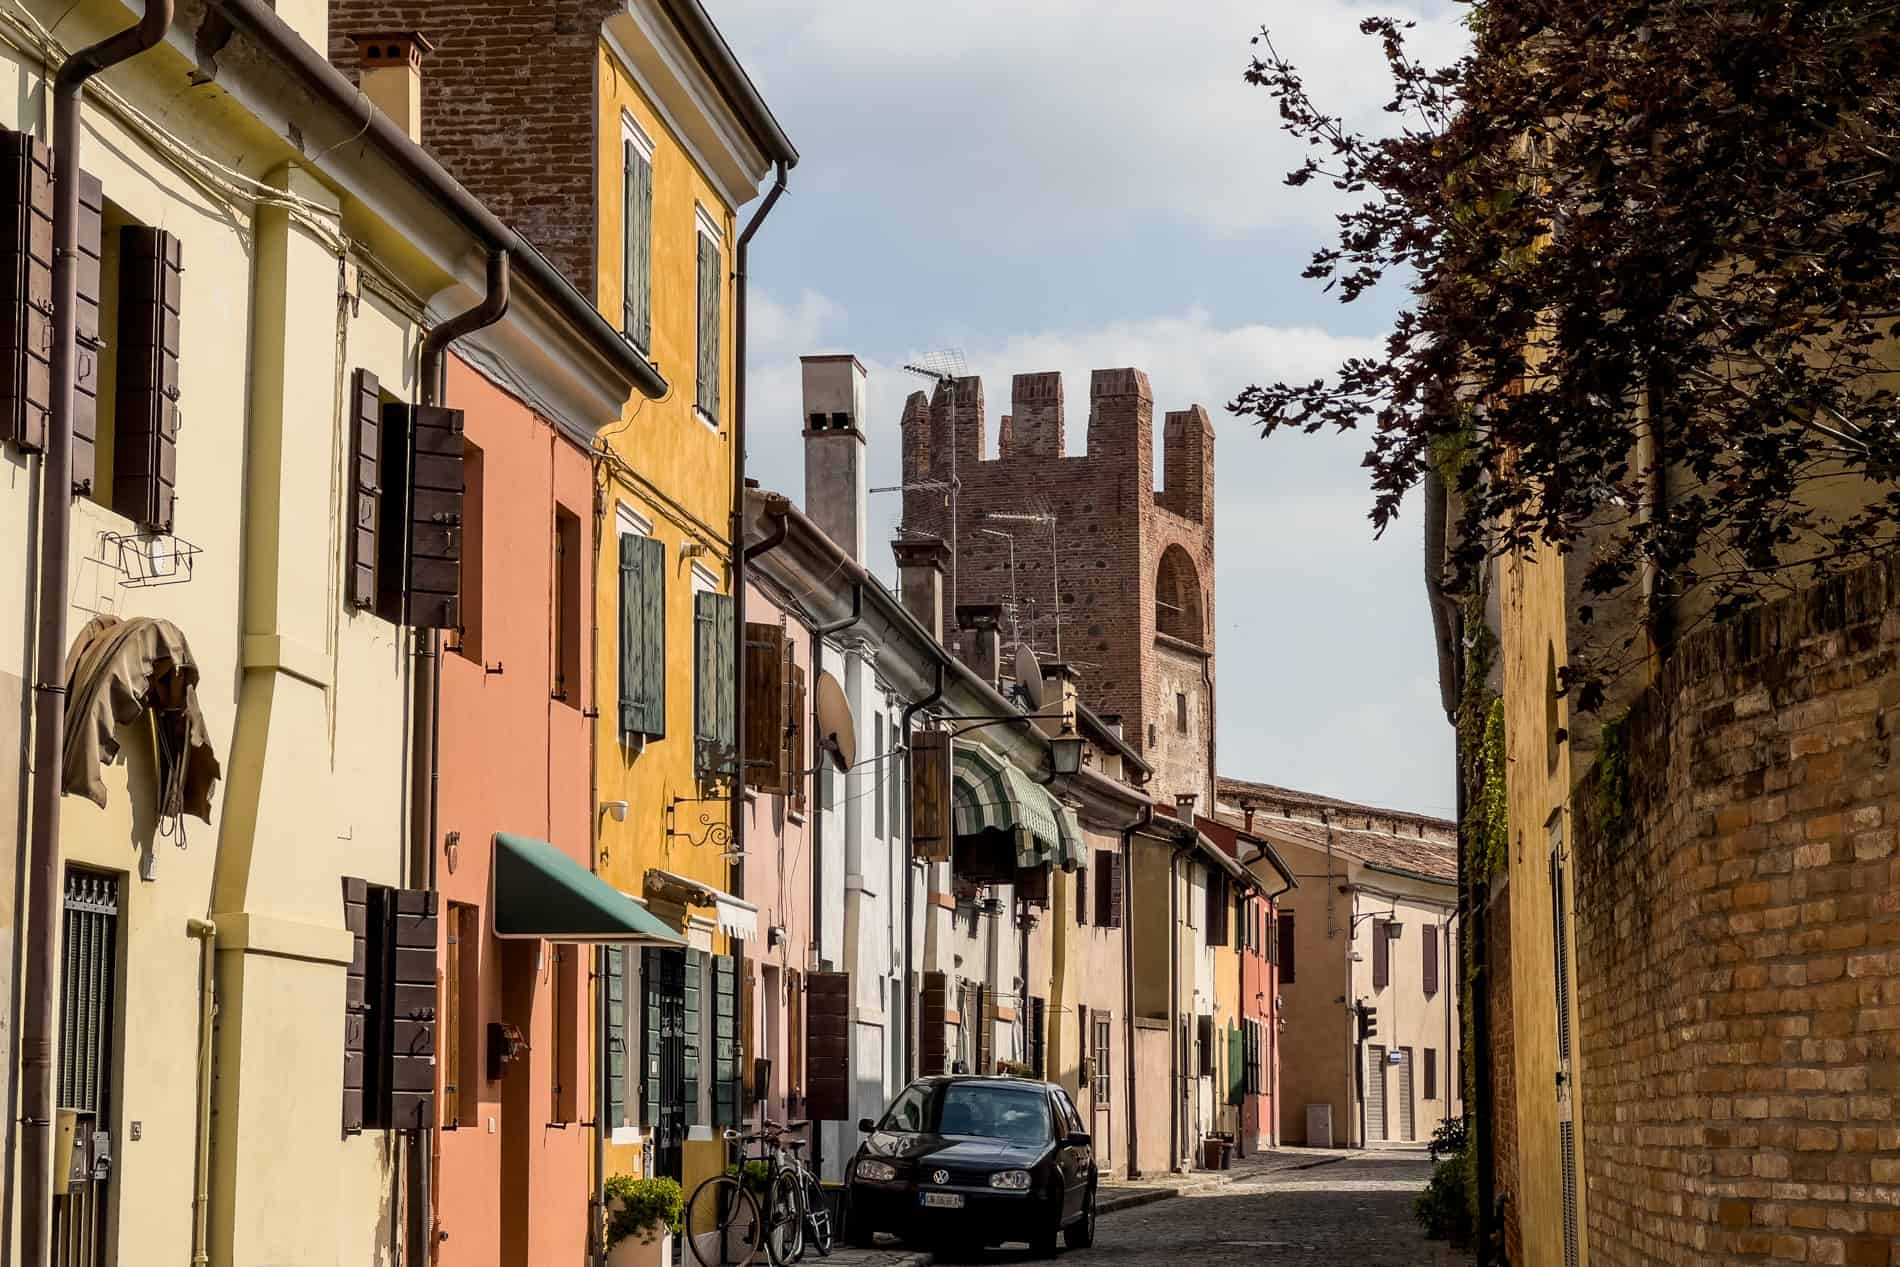 A row of colourful houses intersected by a medieval tower, in Montagnana, Italy. 